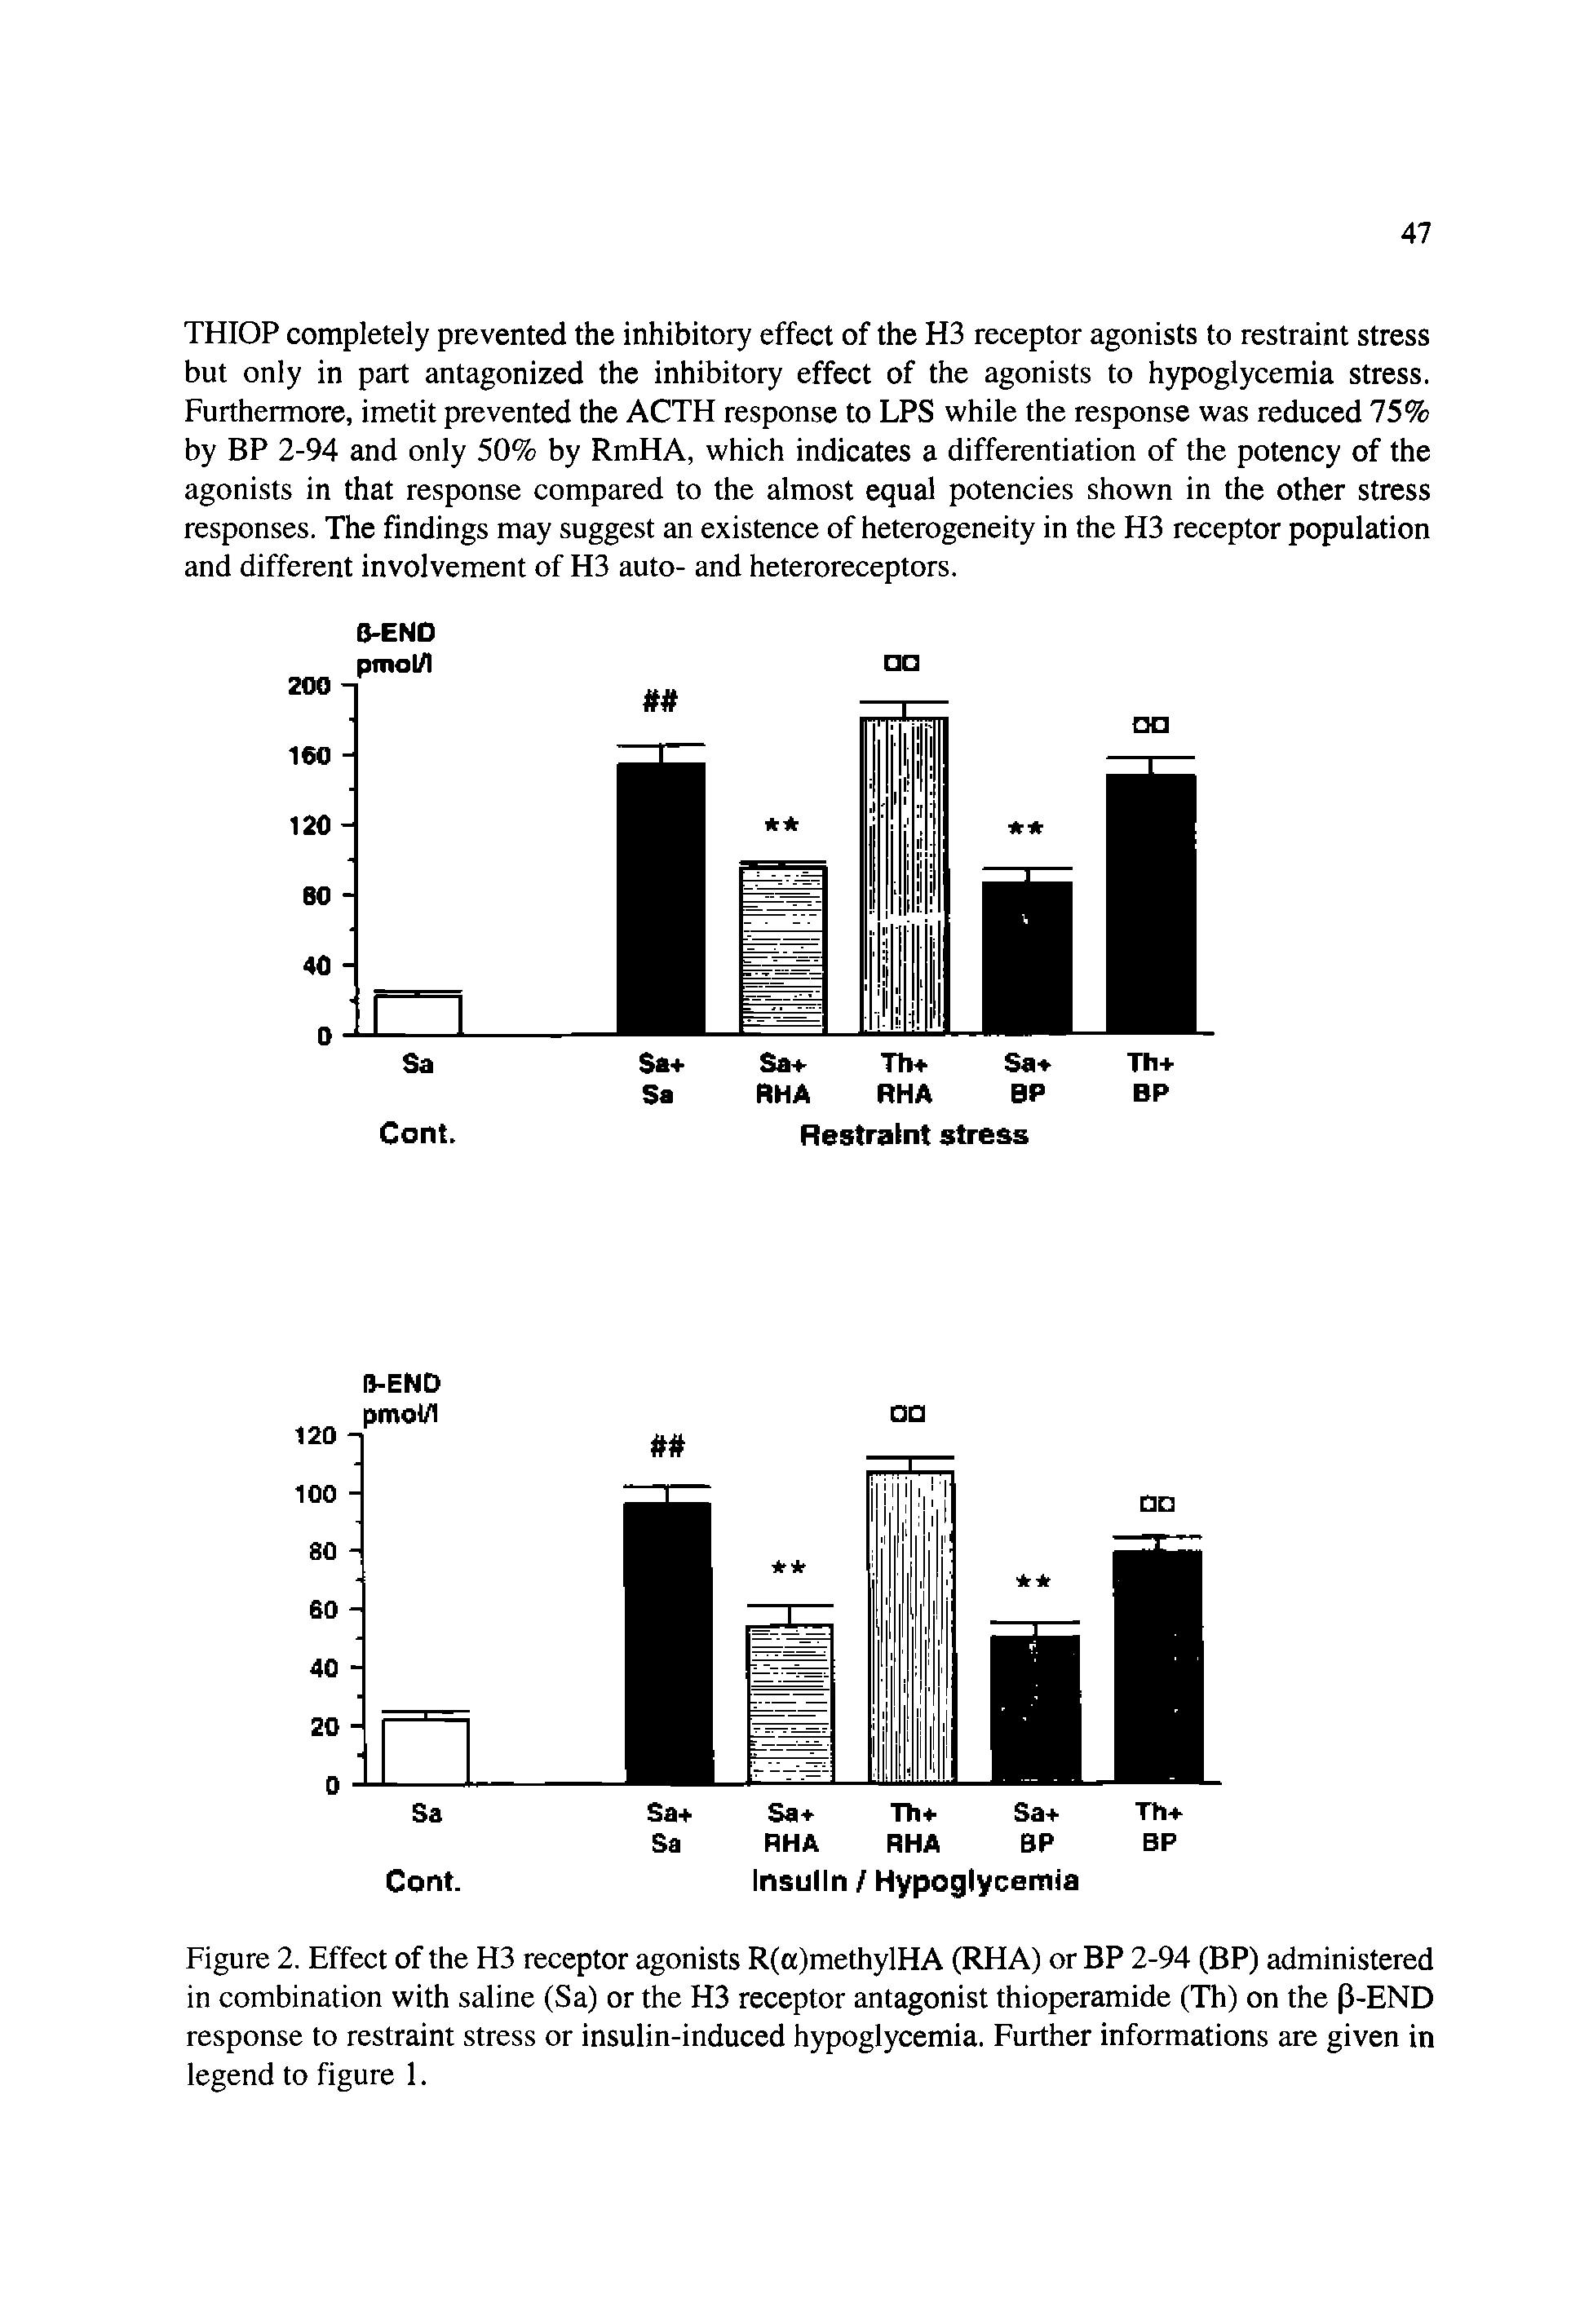 Figure 2. Effect of the H3 receptor agonists R(a)methylHA (RHA) or BP 2-94 (BP) administered in combination with saline (Sa) or the H3 receptor antagonist thioperamide (Th) on the P-END response to restraint stress or insulin-induced hypoglycemia. Further informations are given in legend to figure 1.